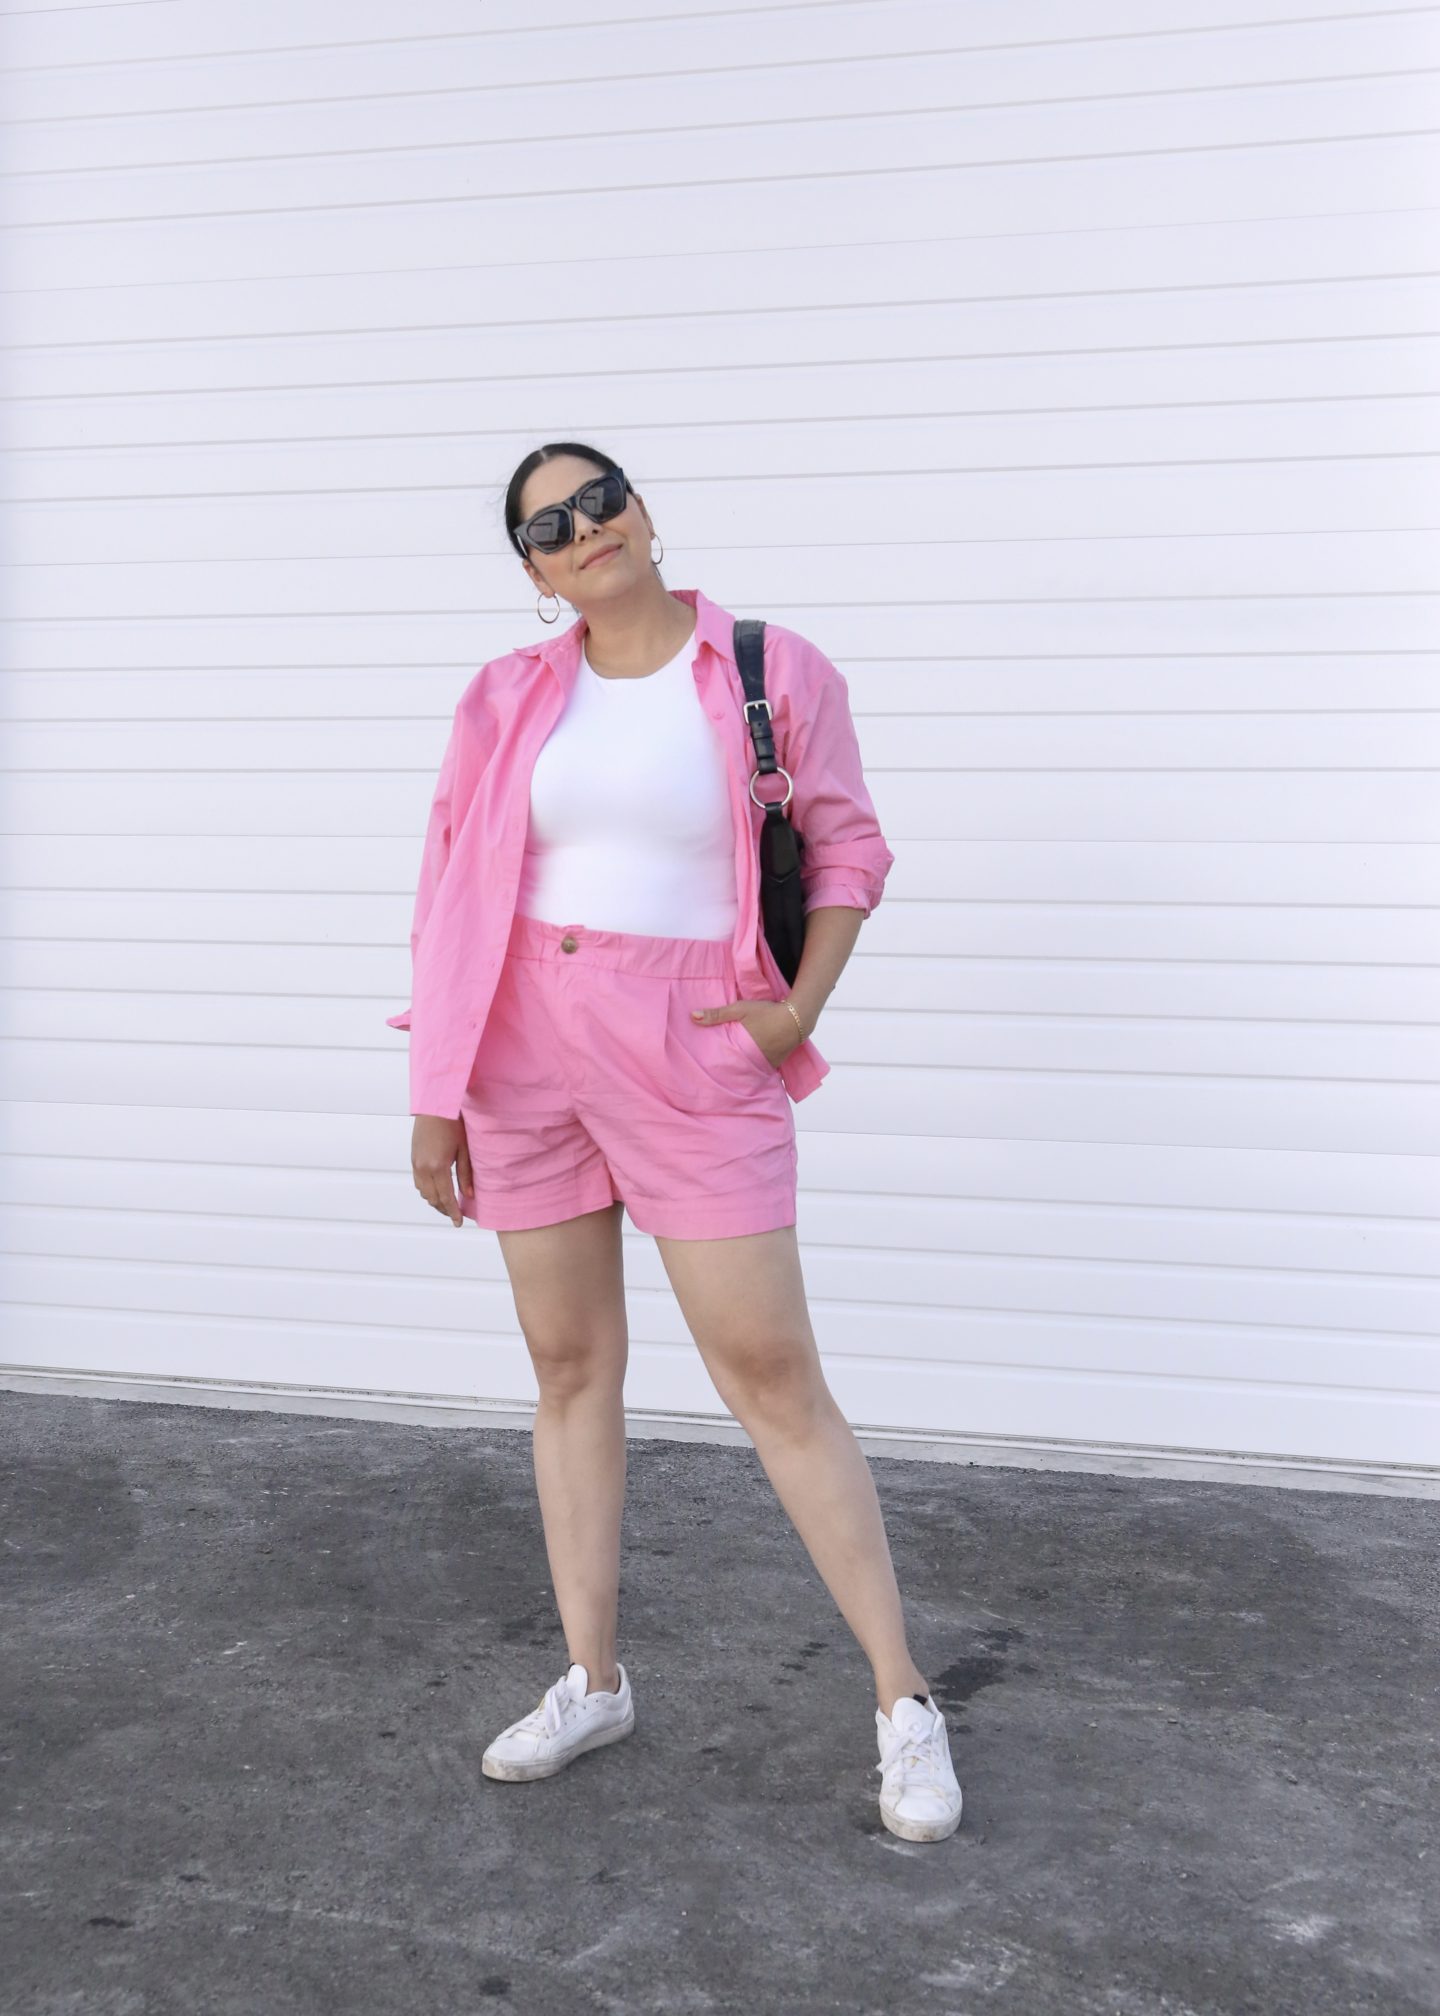 what to wear this summer 2022, casual cute summer look, hot pink casual outfit